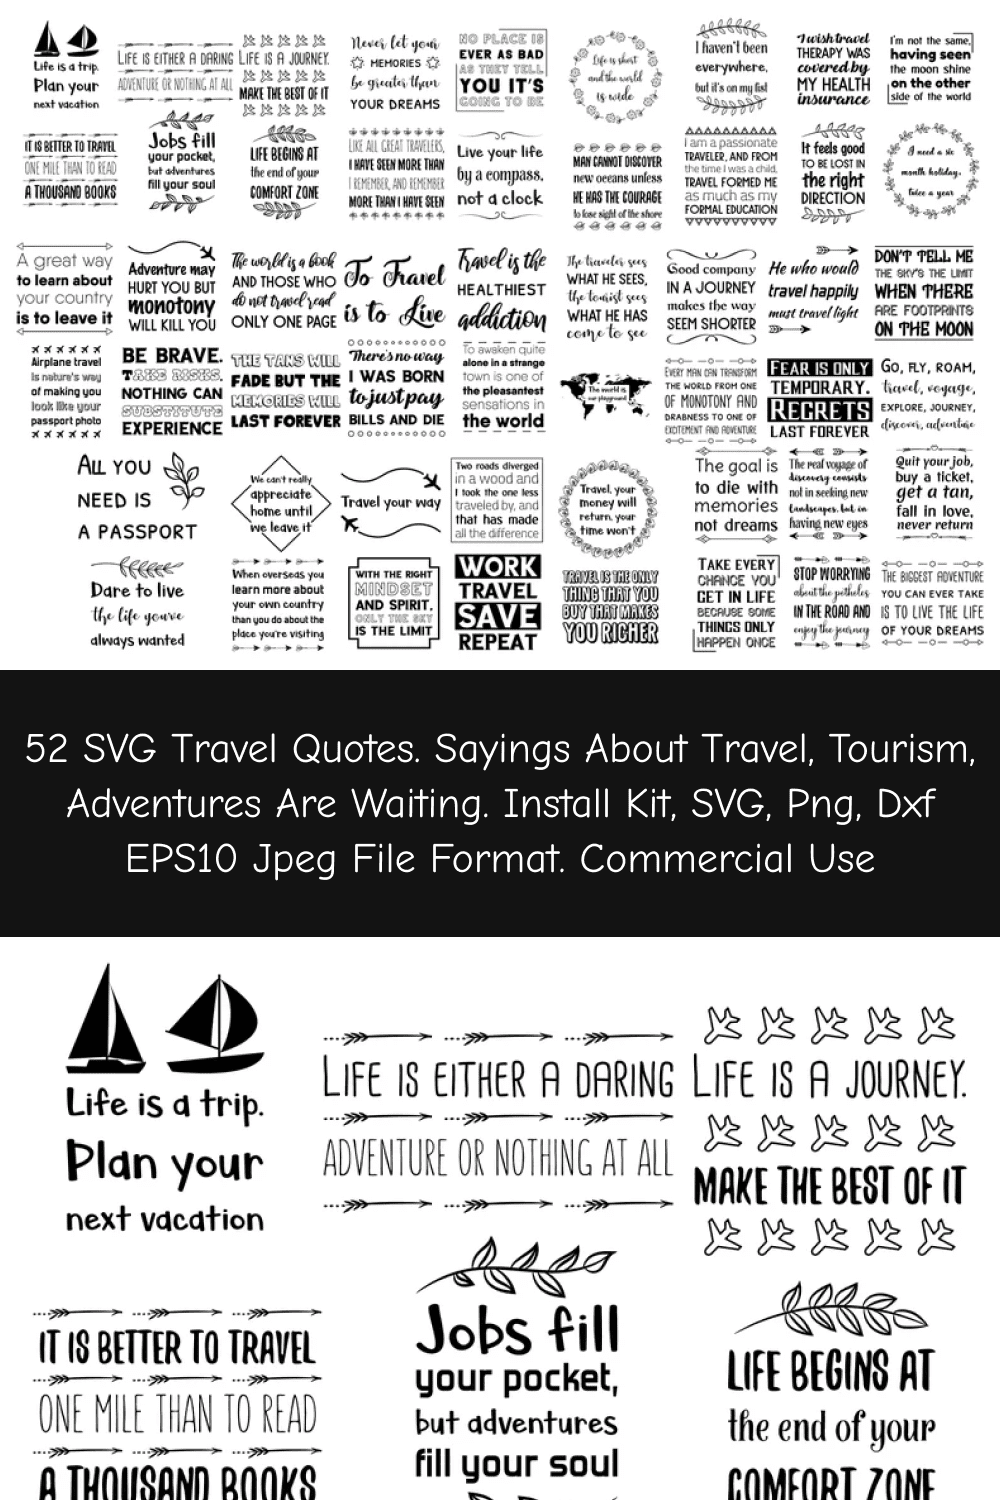 52 SVG Travel Quotes.